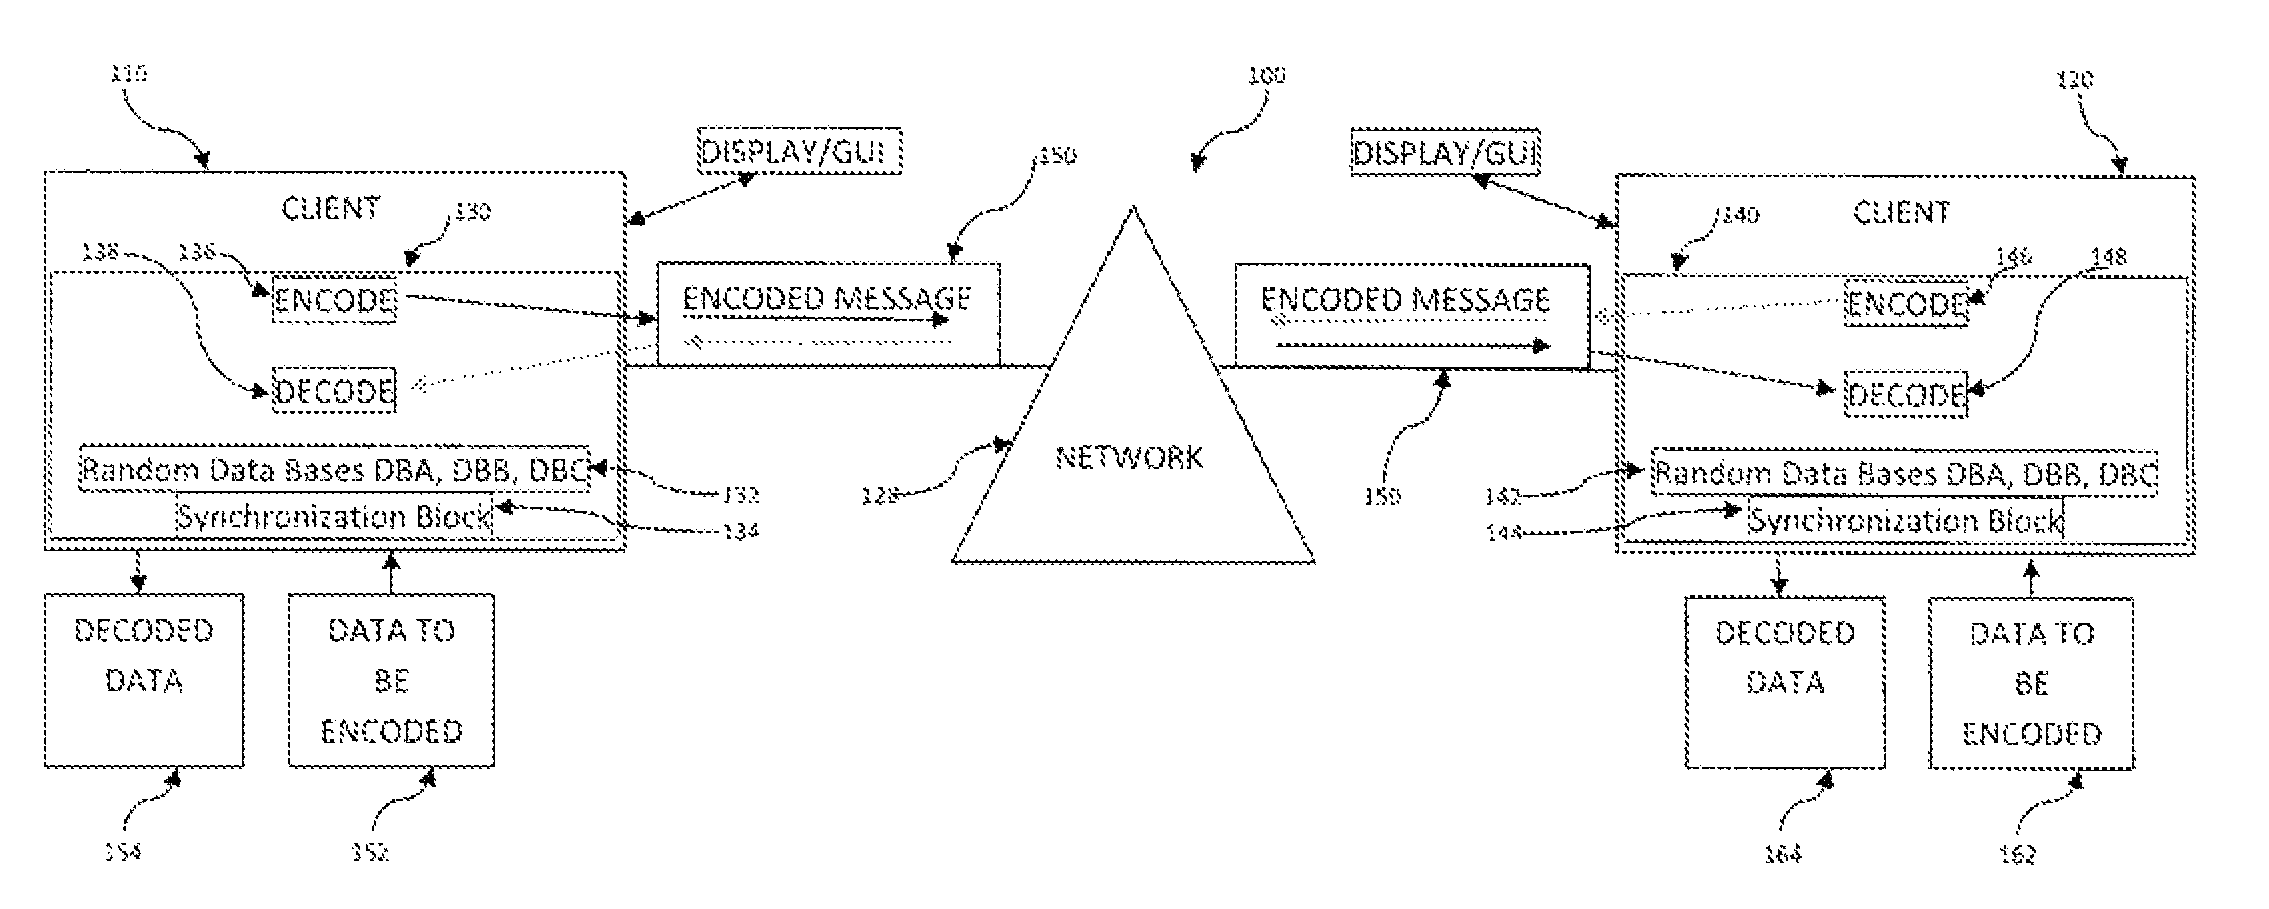 System and method for encryption and decryption of data transferred between computer systems